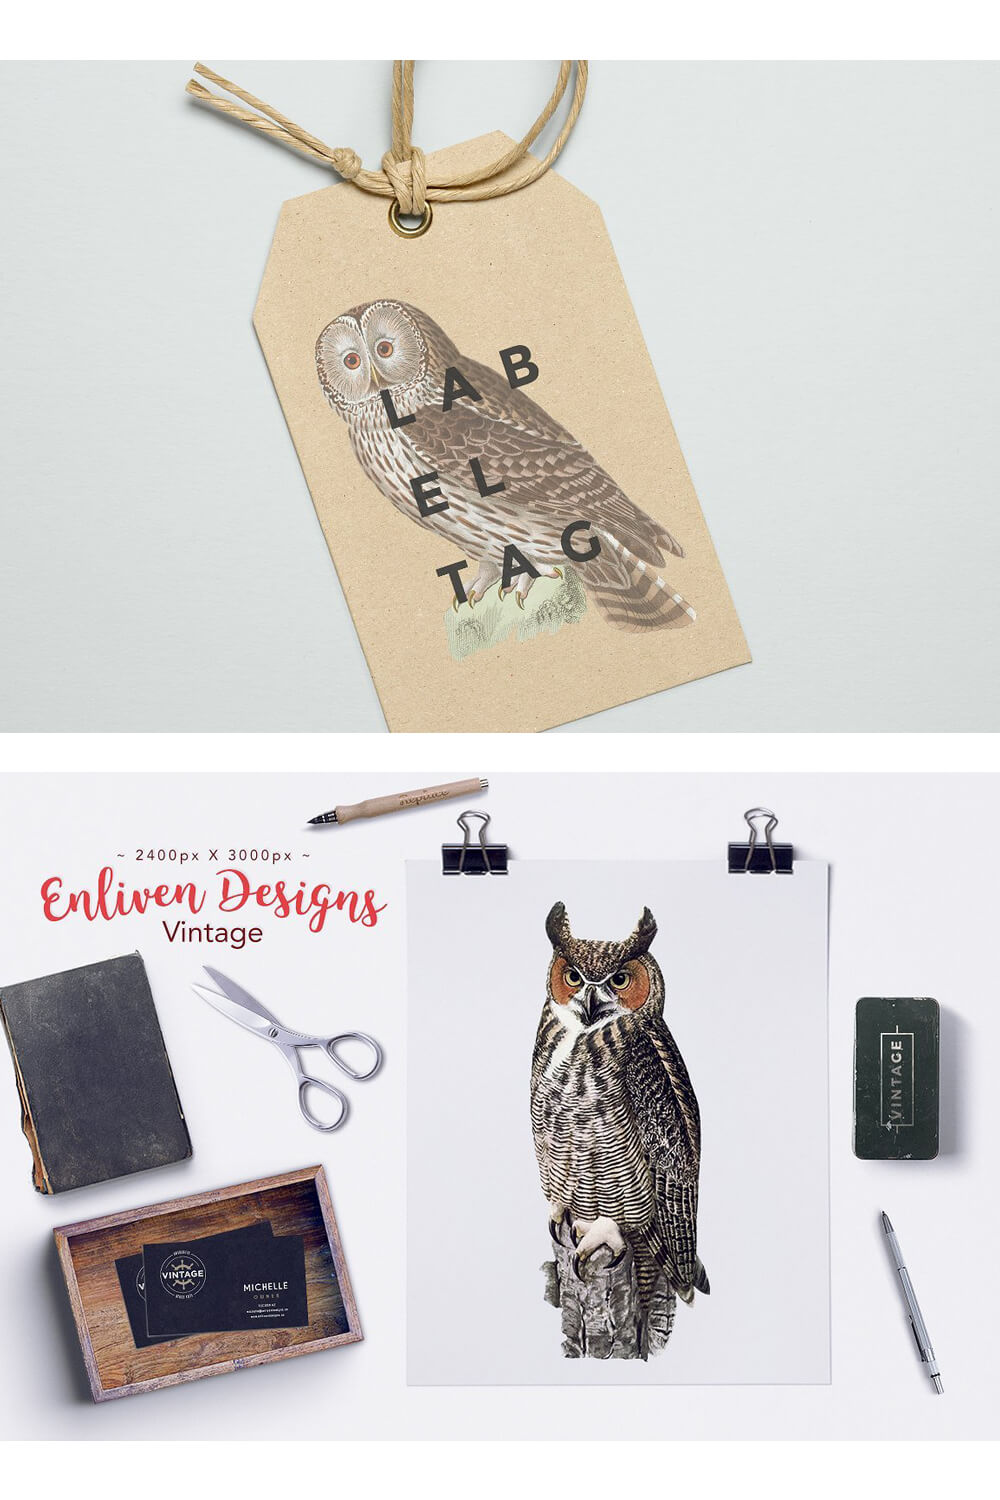 A tag with an owl and an inscription, in the second picture an owl drawn on a white sheet, scissors, books and business cards.